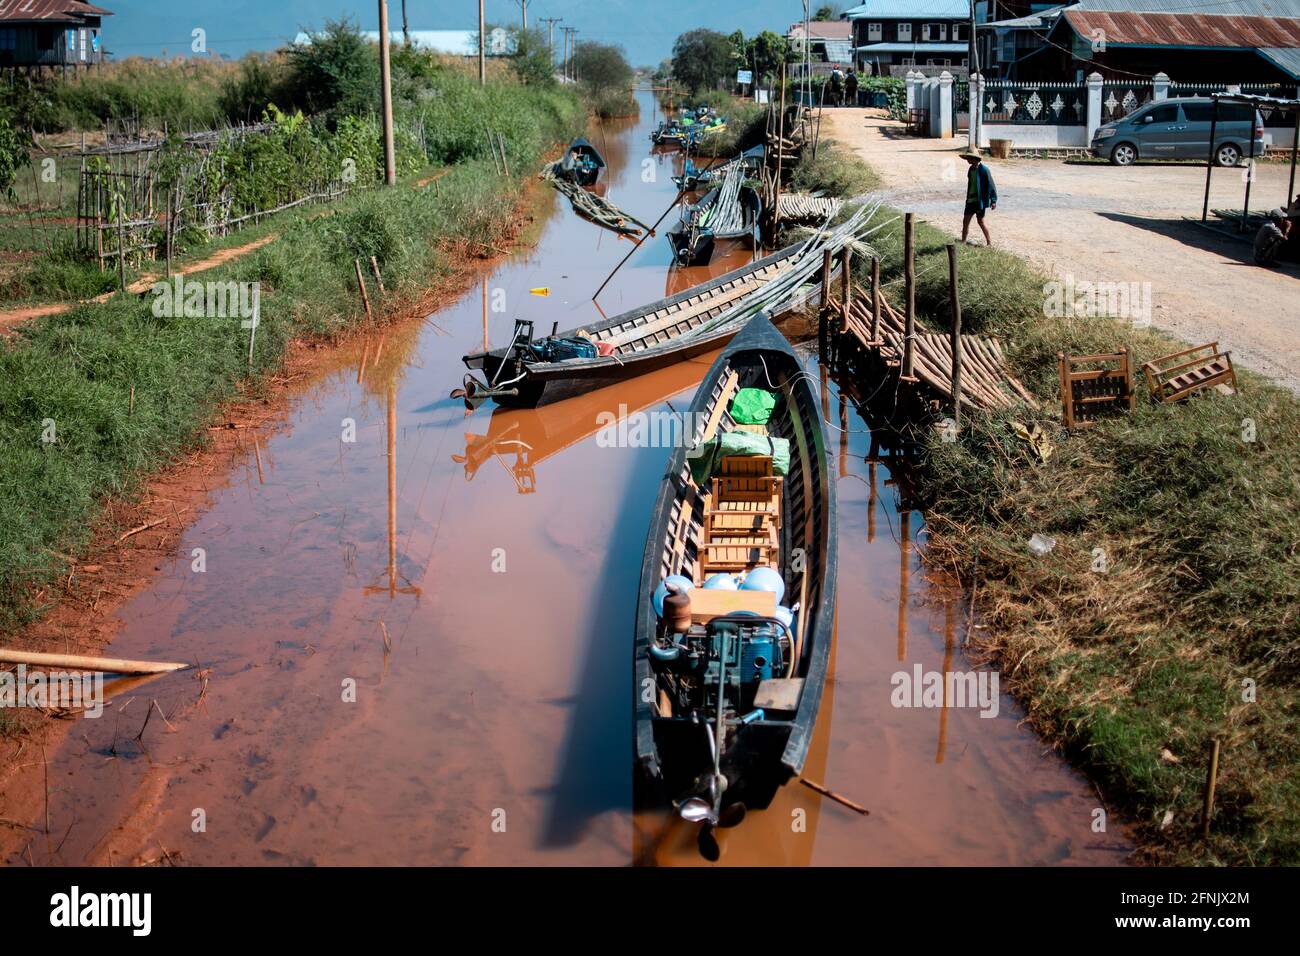 Shan state, Myanmar - January 7 2020: Traditional boats in a narrow muddy canal in a village near Inle Lake, Nyaung Shwe Stock Photo